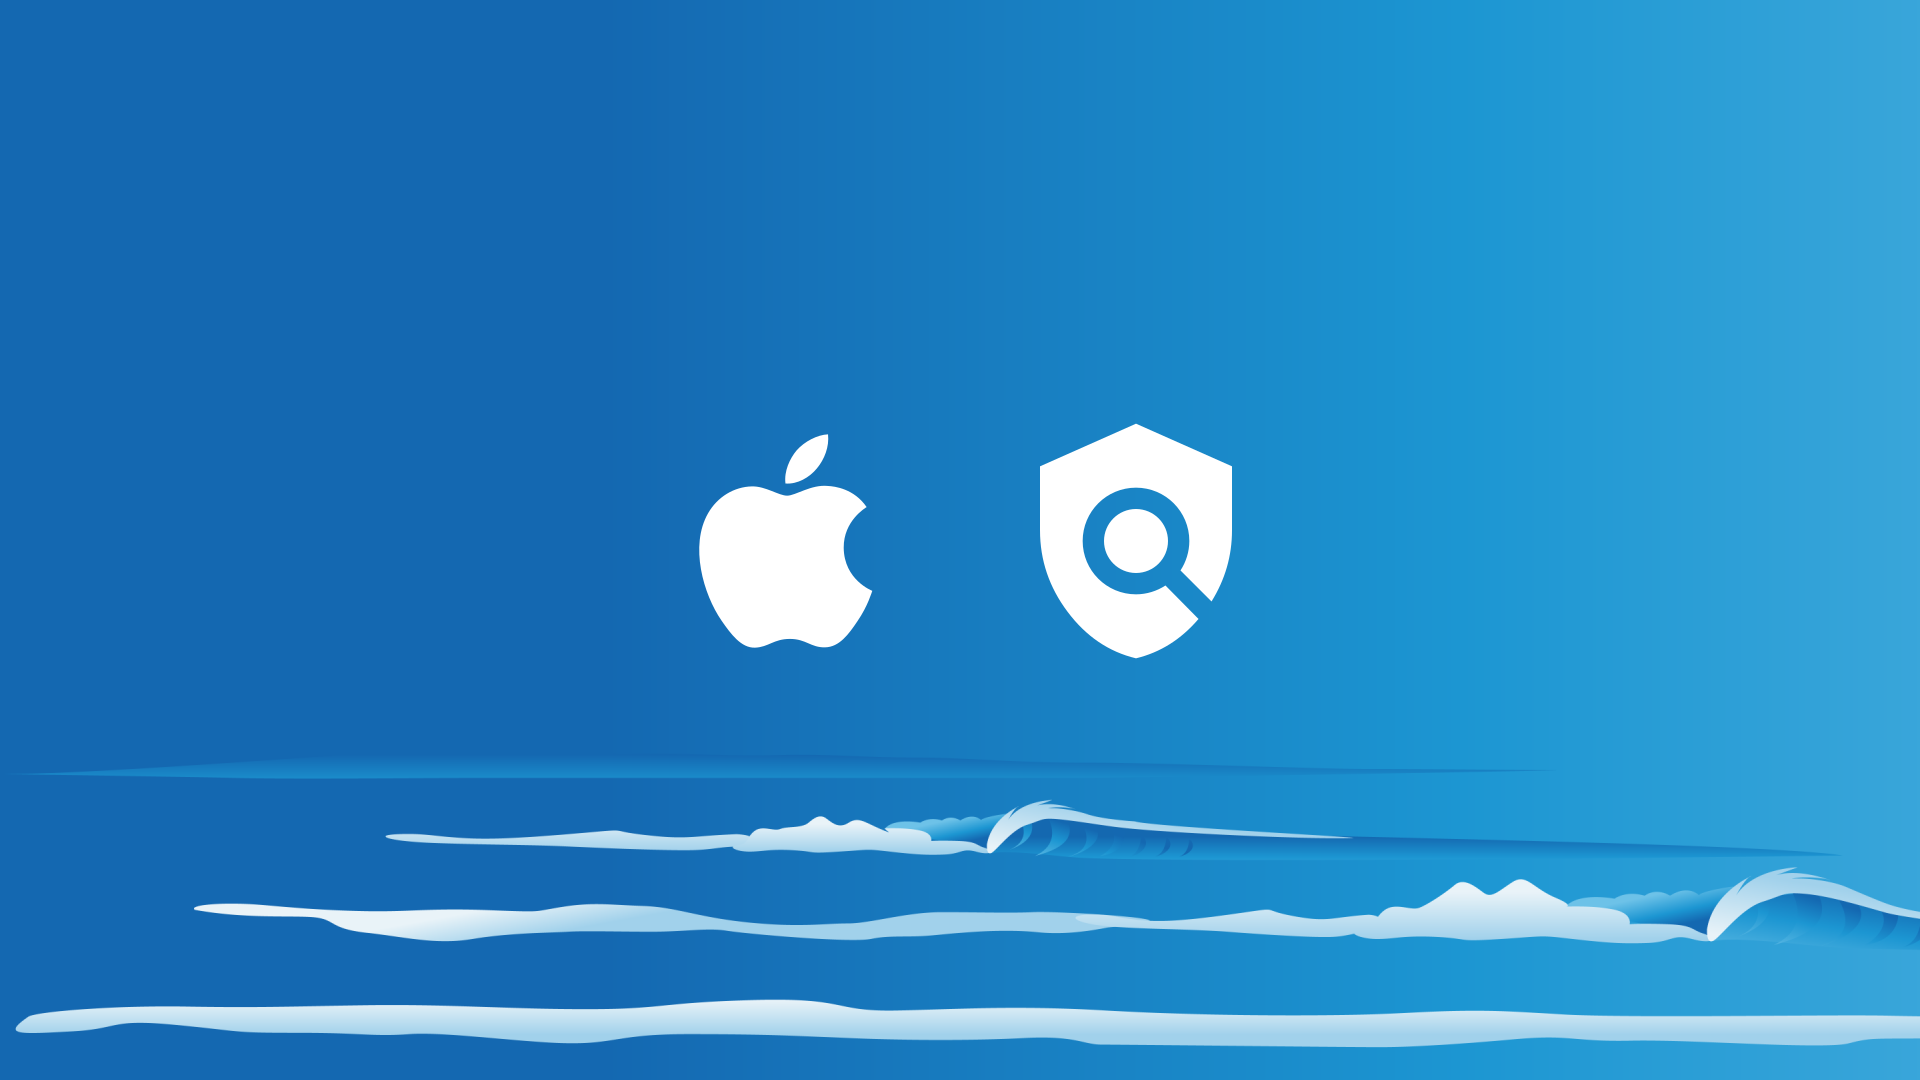 Sea background with Apple logo and search icon